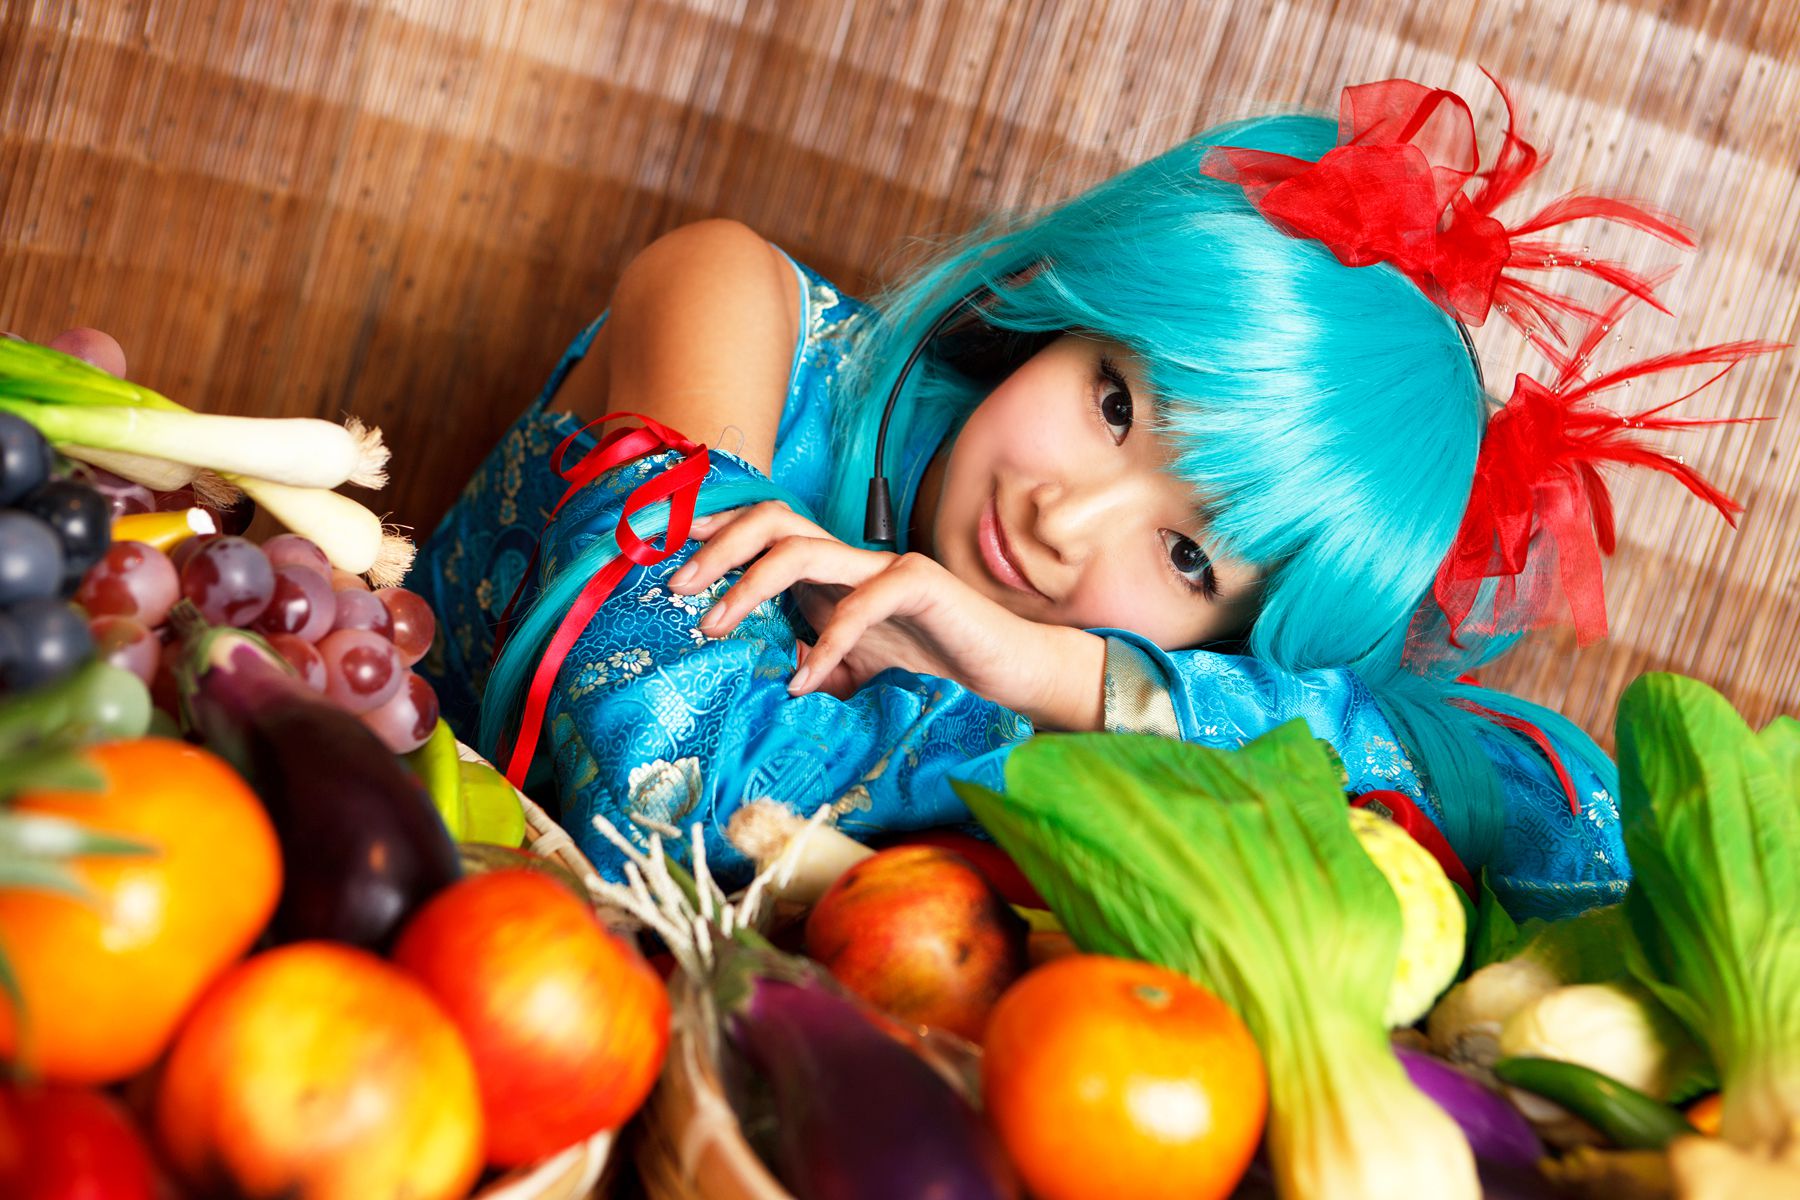 taotuhome[Cosplay] Necoco as Hatsune Miku from Vocaloid 套图第45张